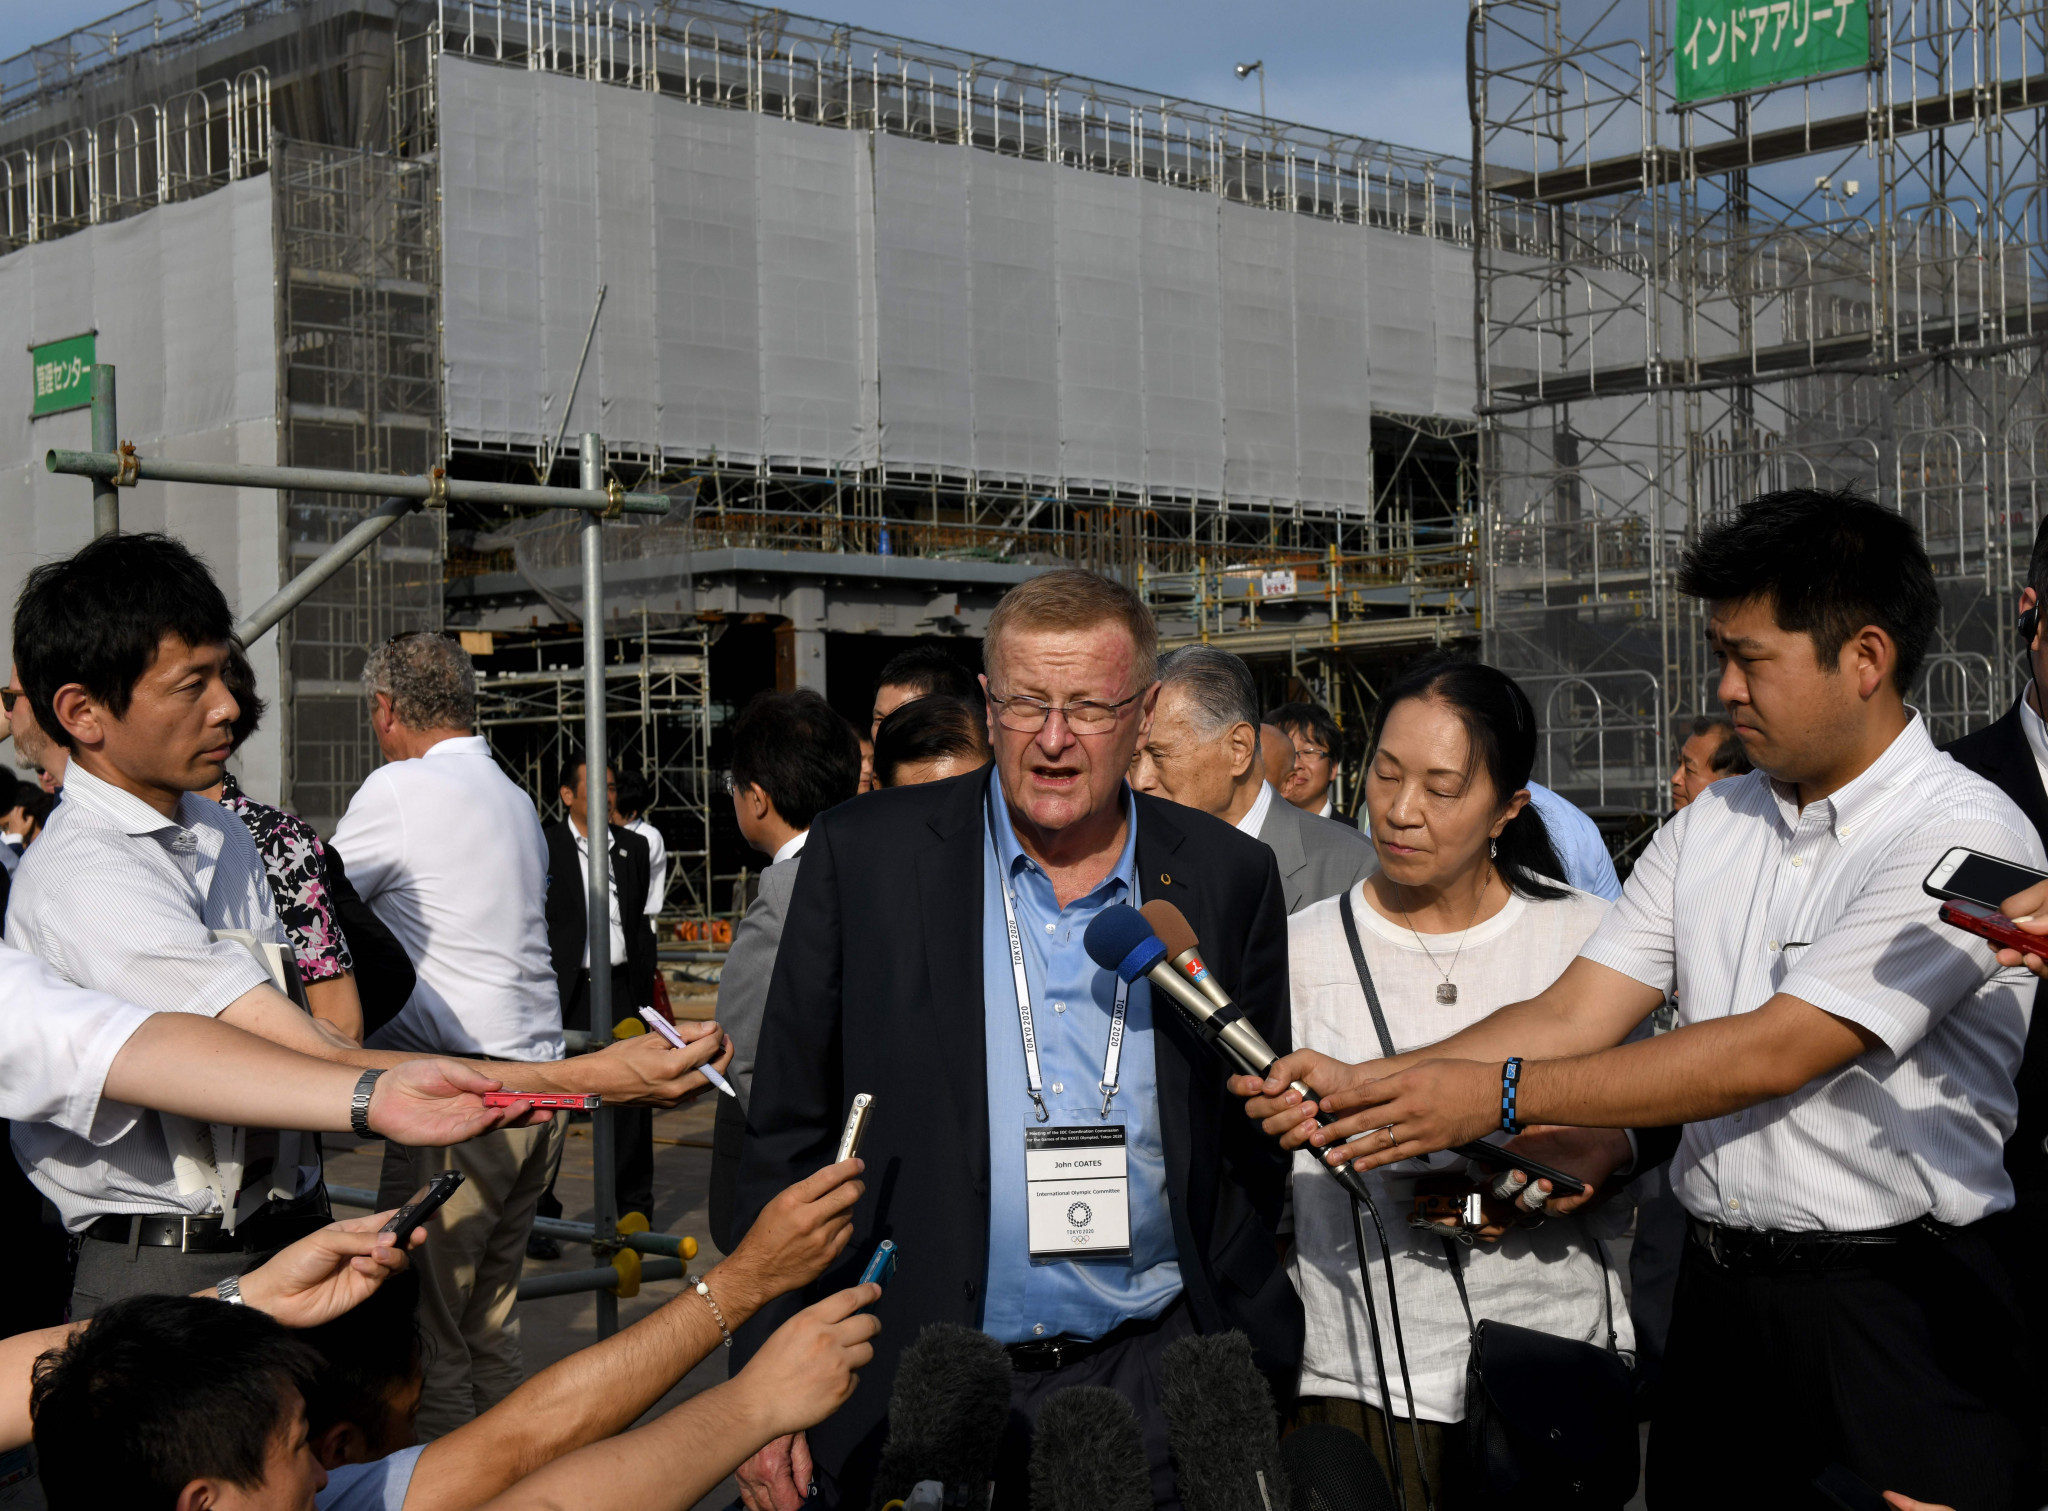 John Coates claimed the IOC were continuing to work with Tokyo 2020 to reduce costs ©Getty Images